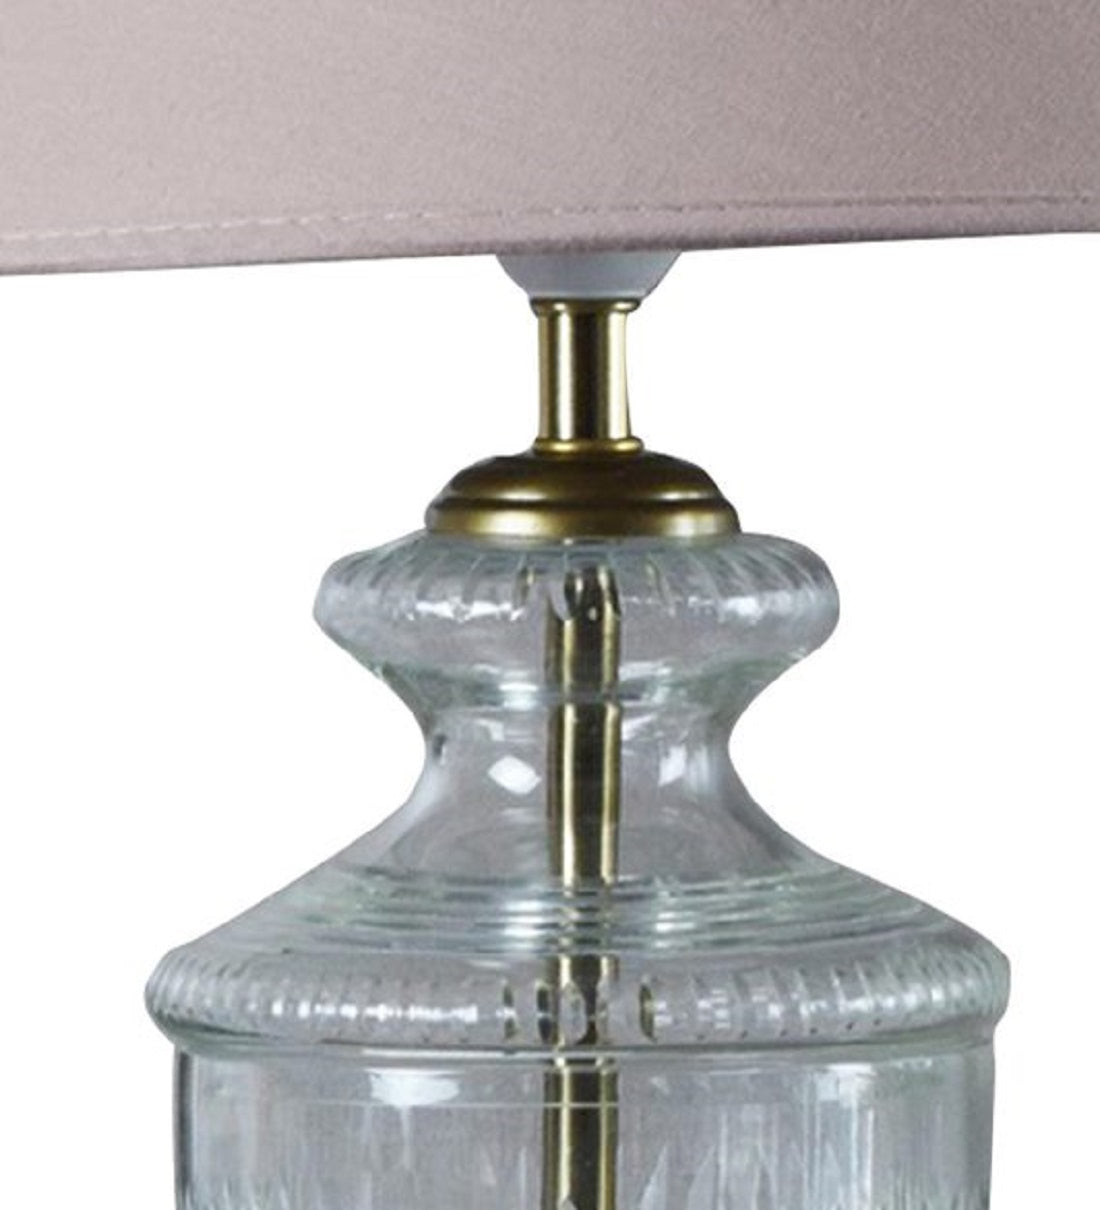 Detec Modern Glass Table Lamp With Beige shade